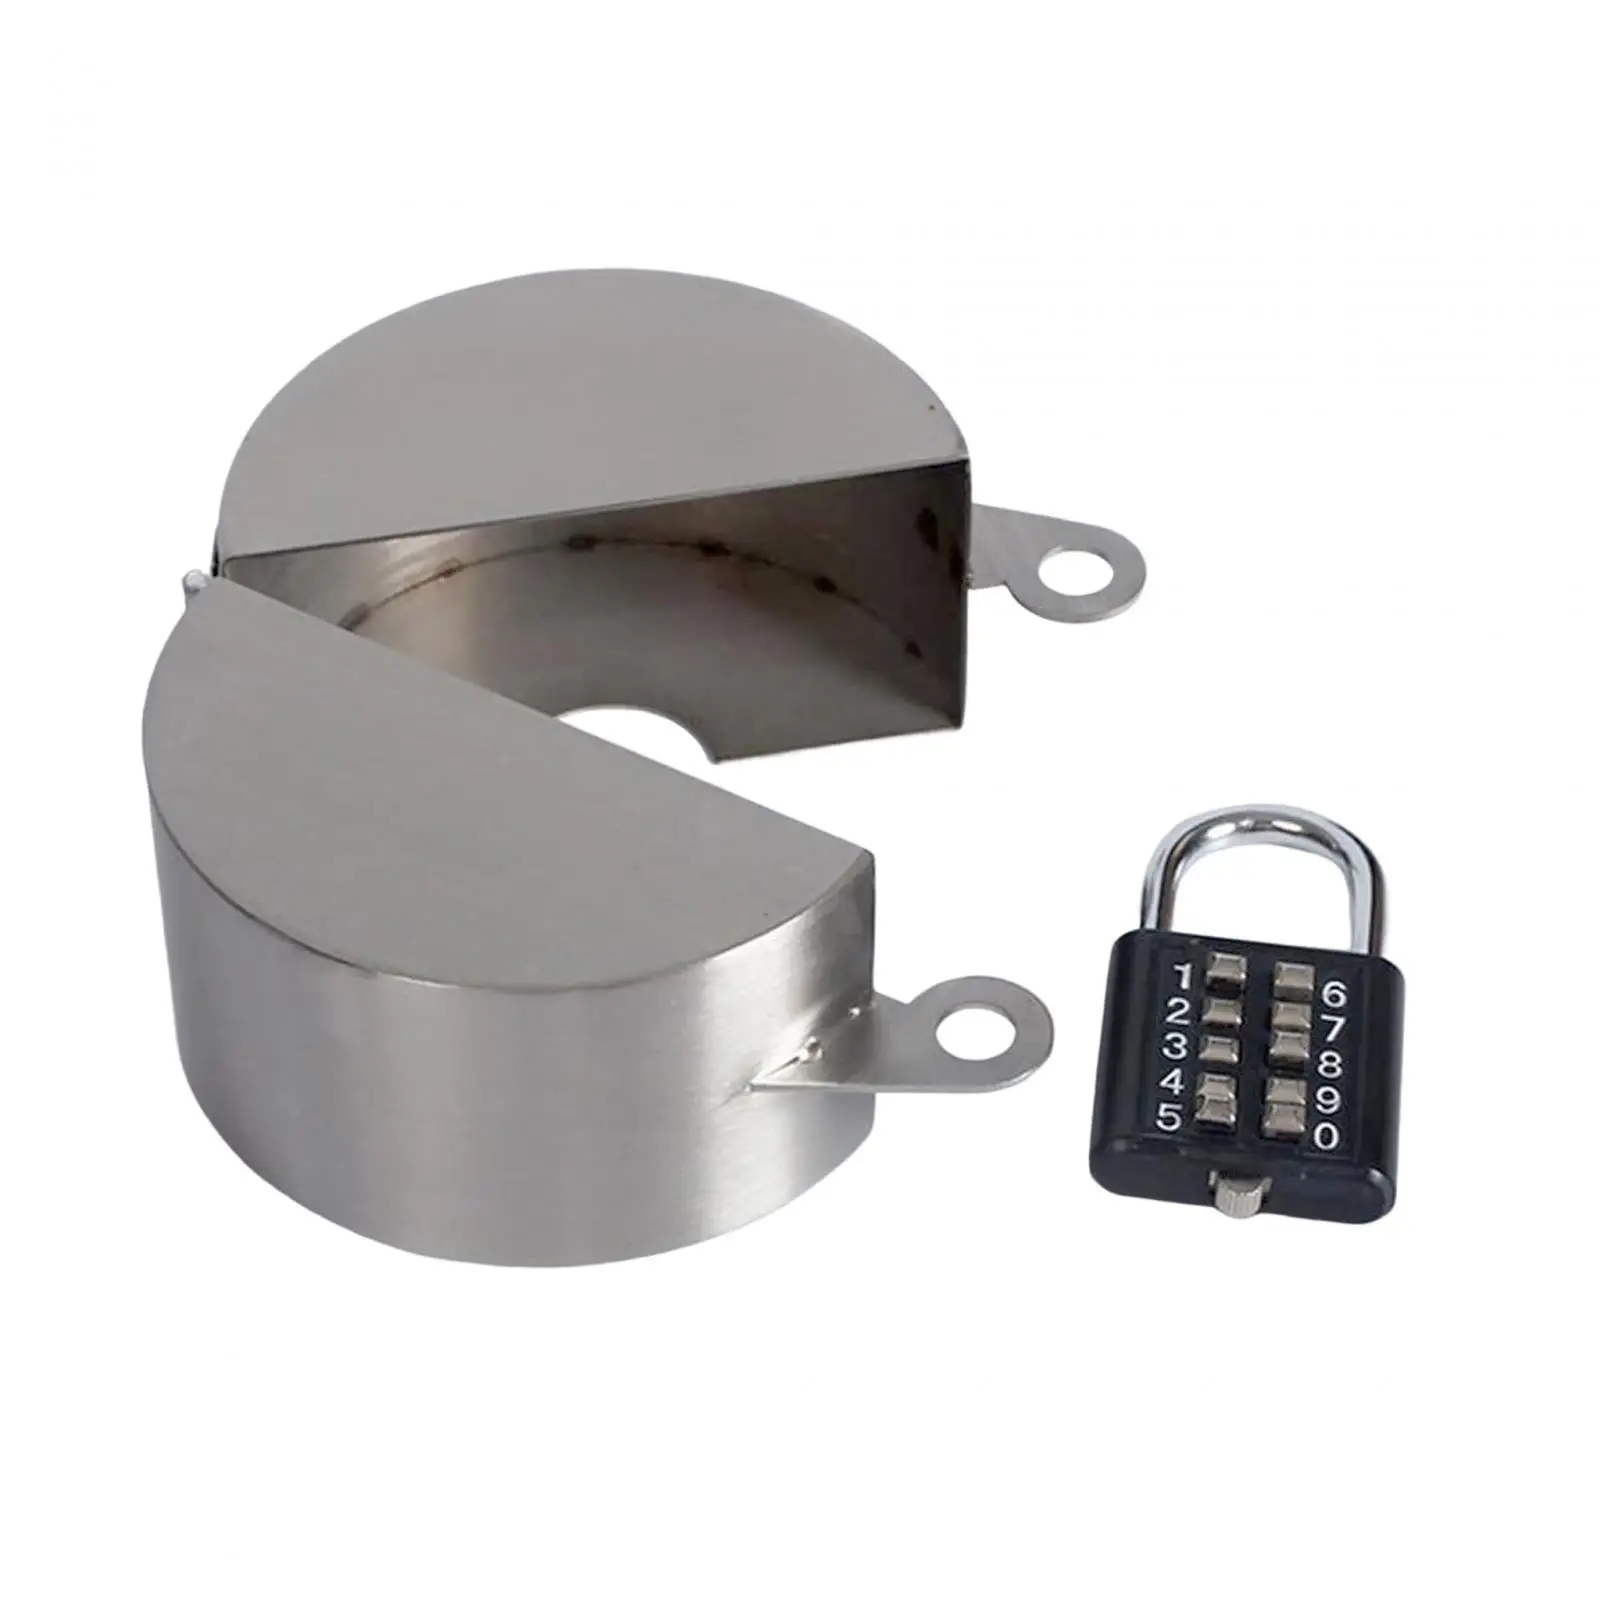 Gate Faucet Locking Device, Stainless Steel, Faucet Cover for Outdoor